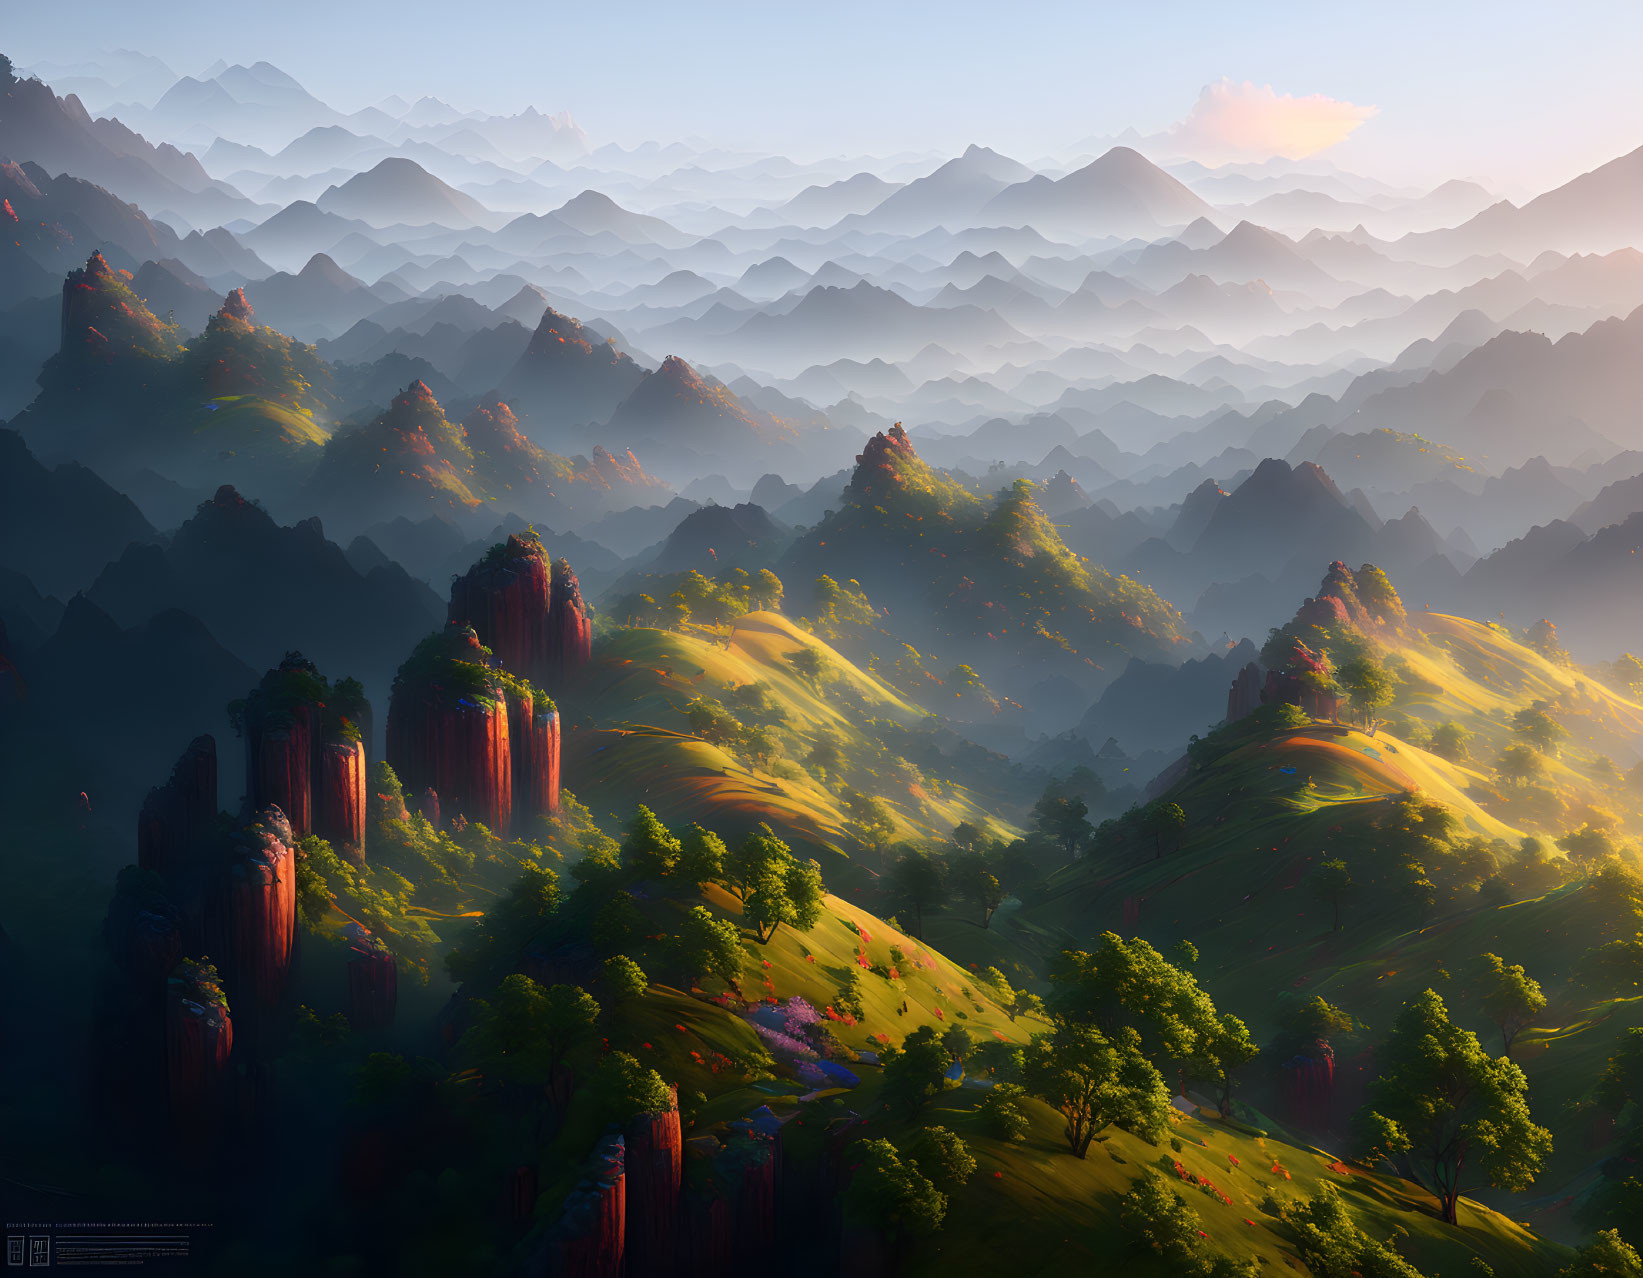 Misty Mountains and Colorful Flora in Tranquil Landscape